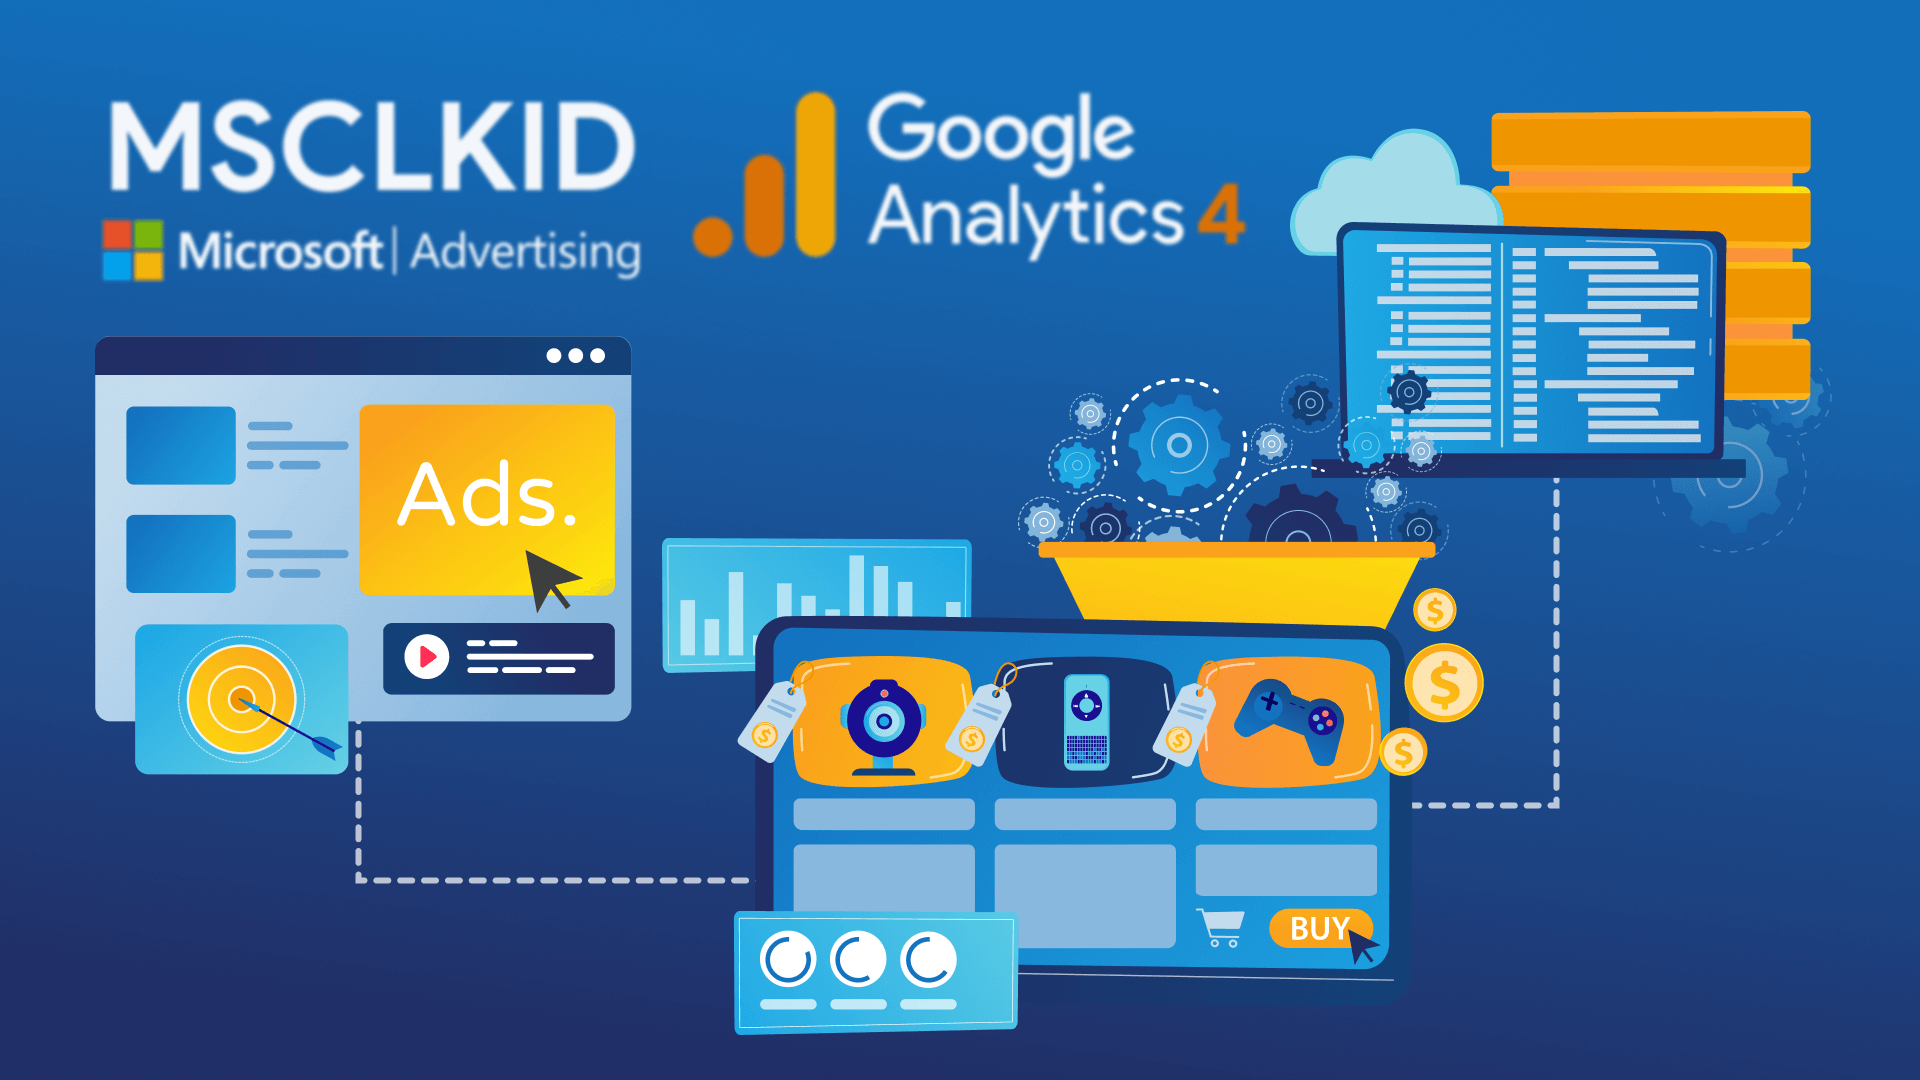 How to store MSCLKID in Google Analytics 4